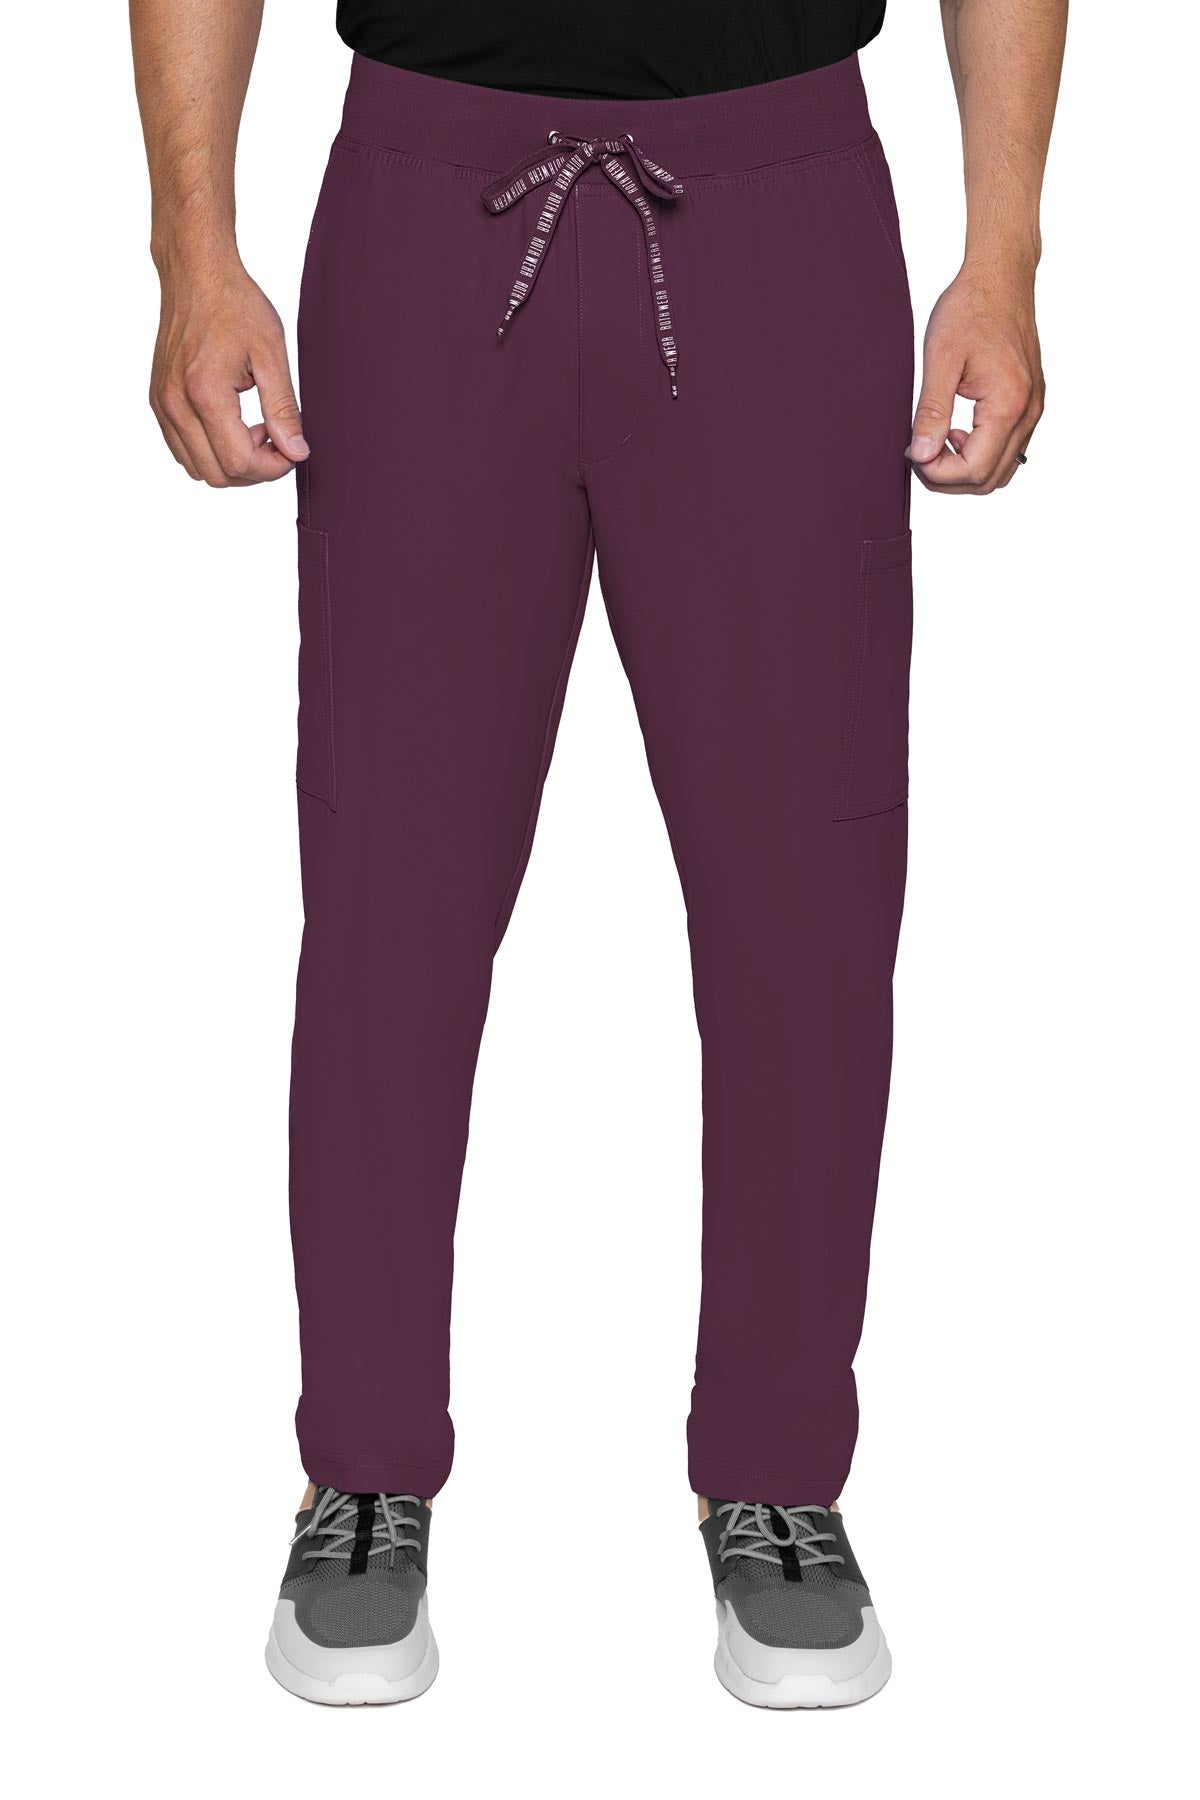 Med Couture Mens Scrub Pants RothWear Insight in wine at Parker's Clothing and Shoes.